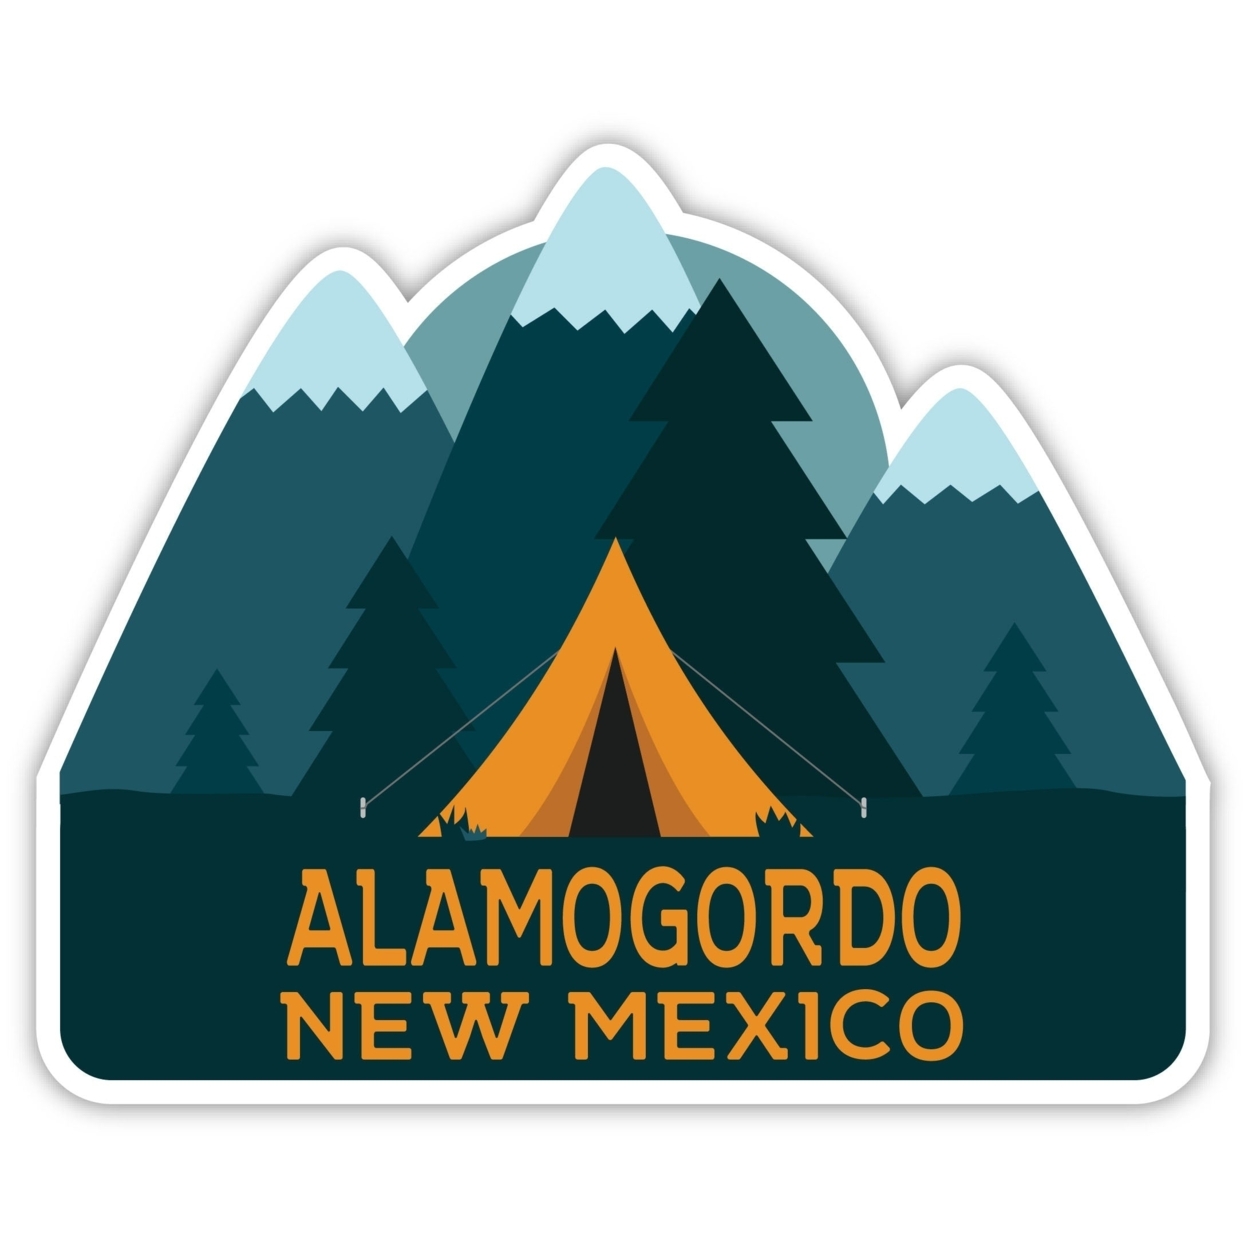 Alamogordo New Mexico Souvenir Decorative Stickers (Choose Theme And Size) - 4-Pack, 10-Inch, Tent